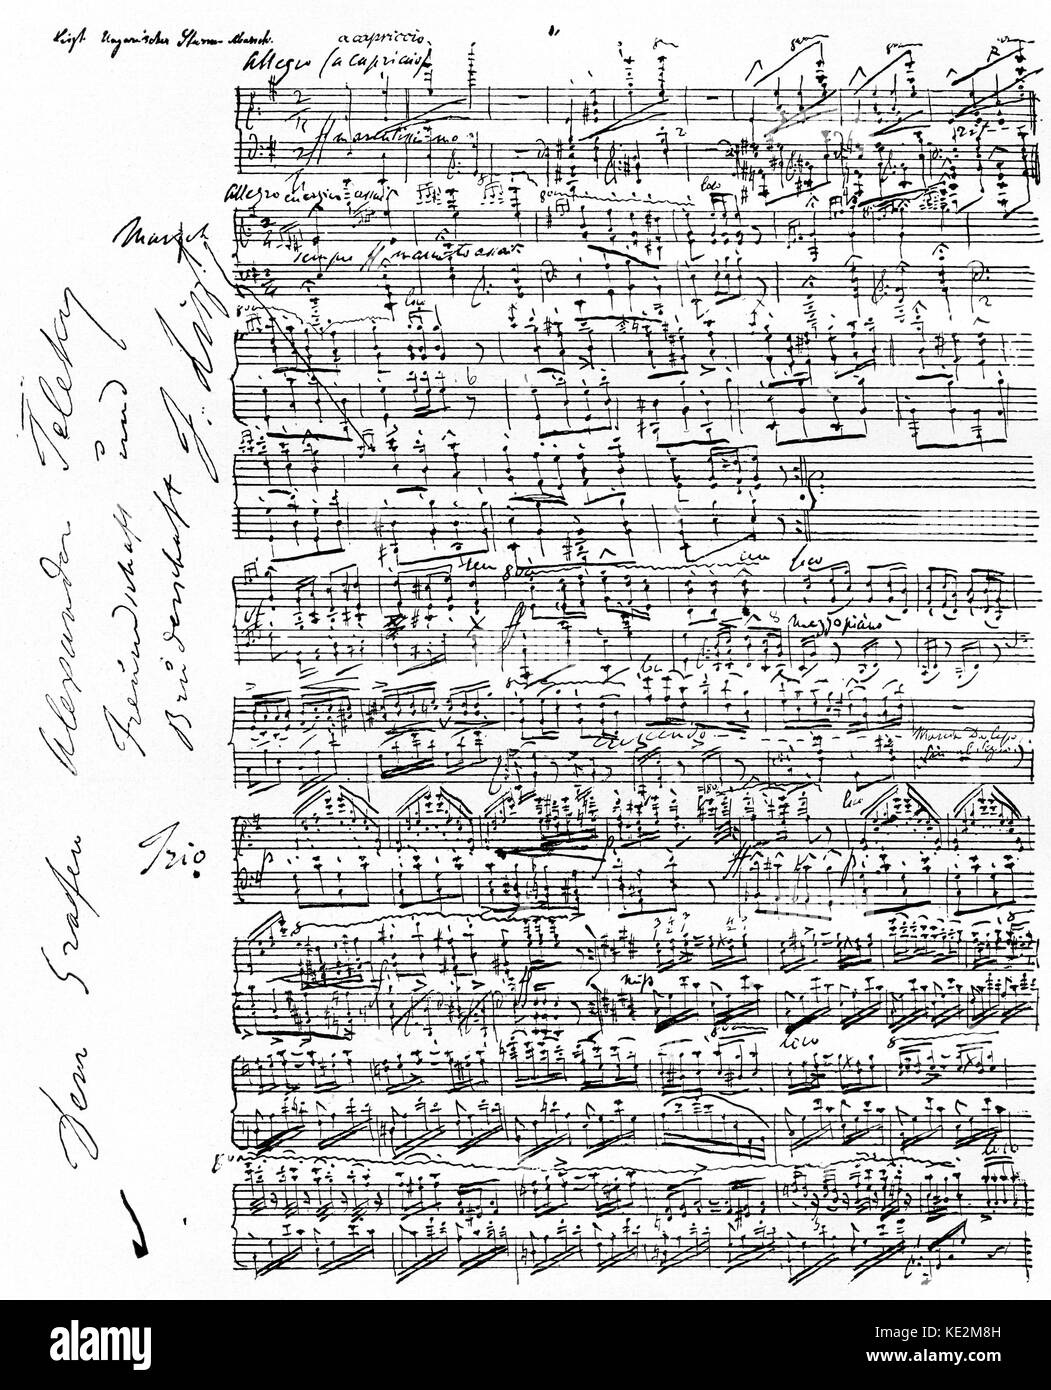 Franz Liszt 's 'Sturmmarsch / Storm March' - score page with dedication.  Hungarian pianist and composer, 22 October 1811 - 31 July 1886. Stock Photo